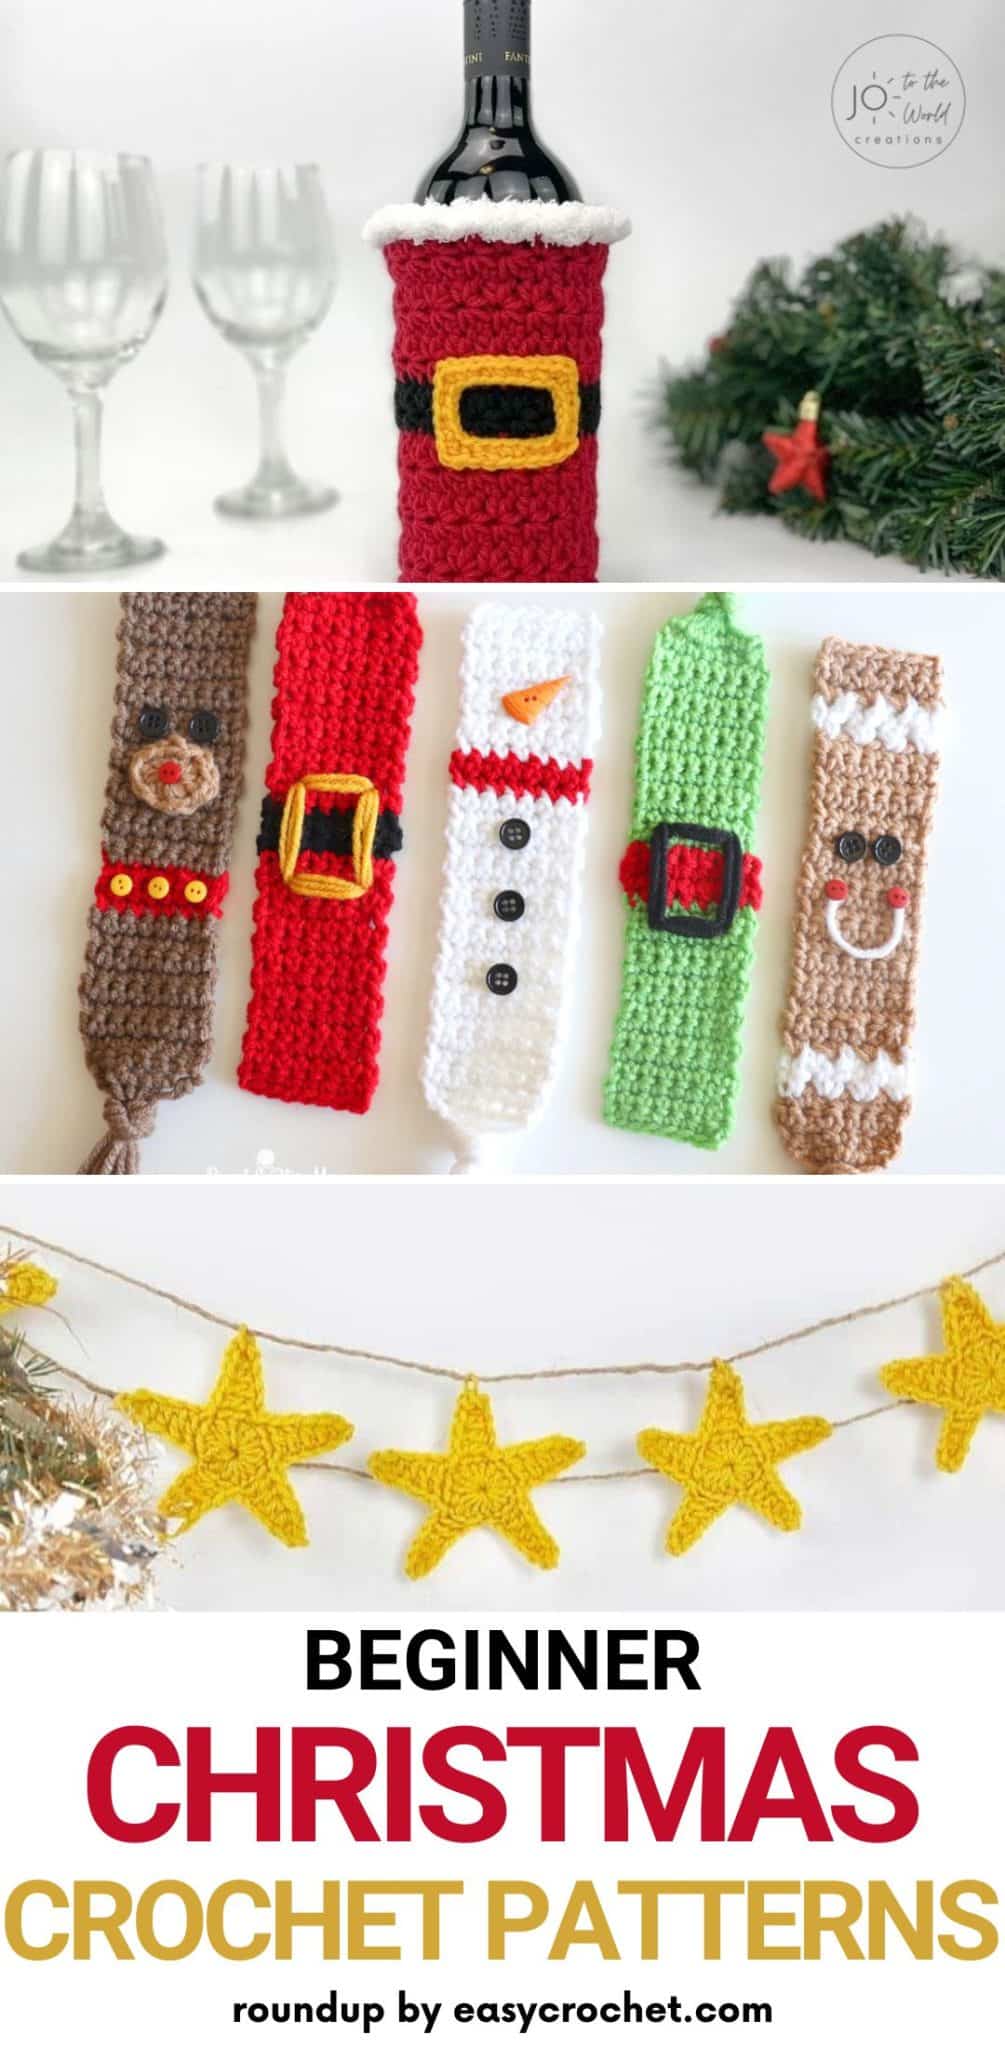 A collection of crochet Christmas patterns for beginners